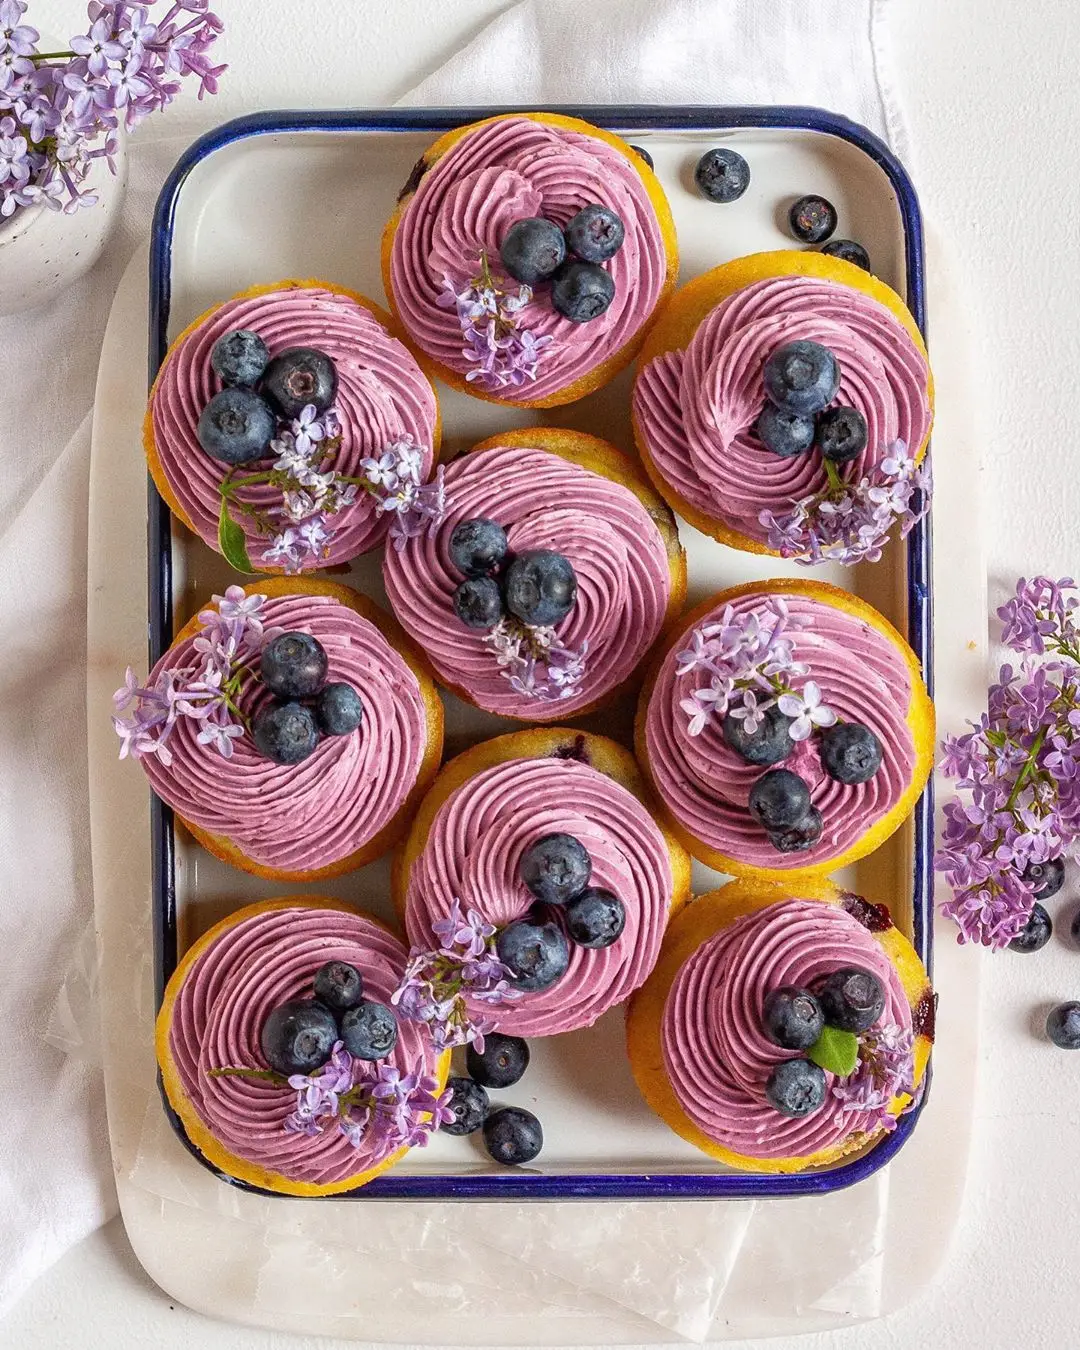 50 of the Cutest Cupcakes Youll Ever See ...